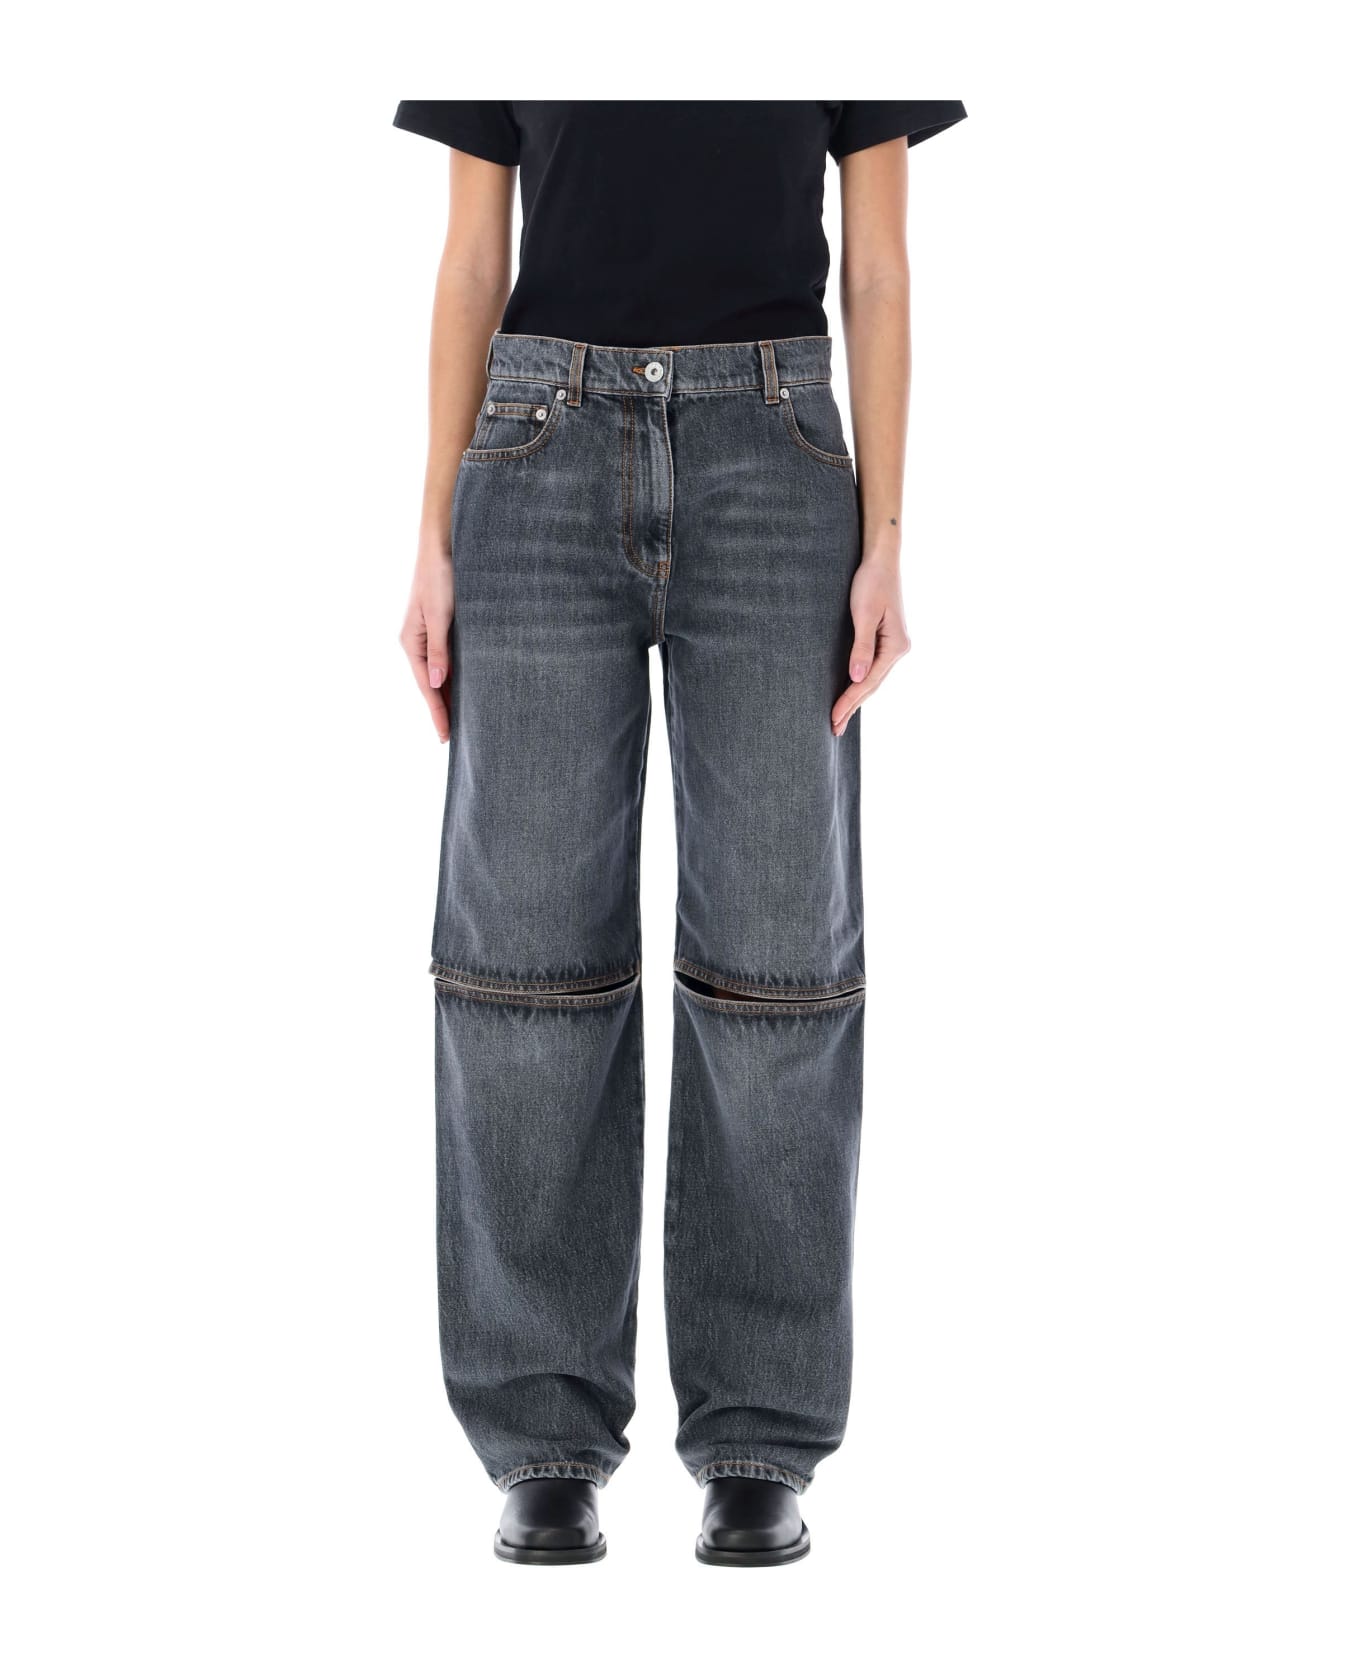 J.W. Anderson Bootcut Jeans - GREY